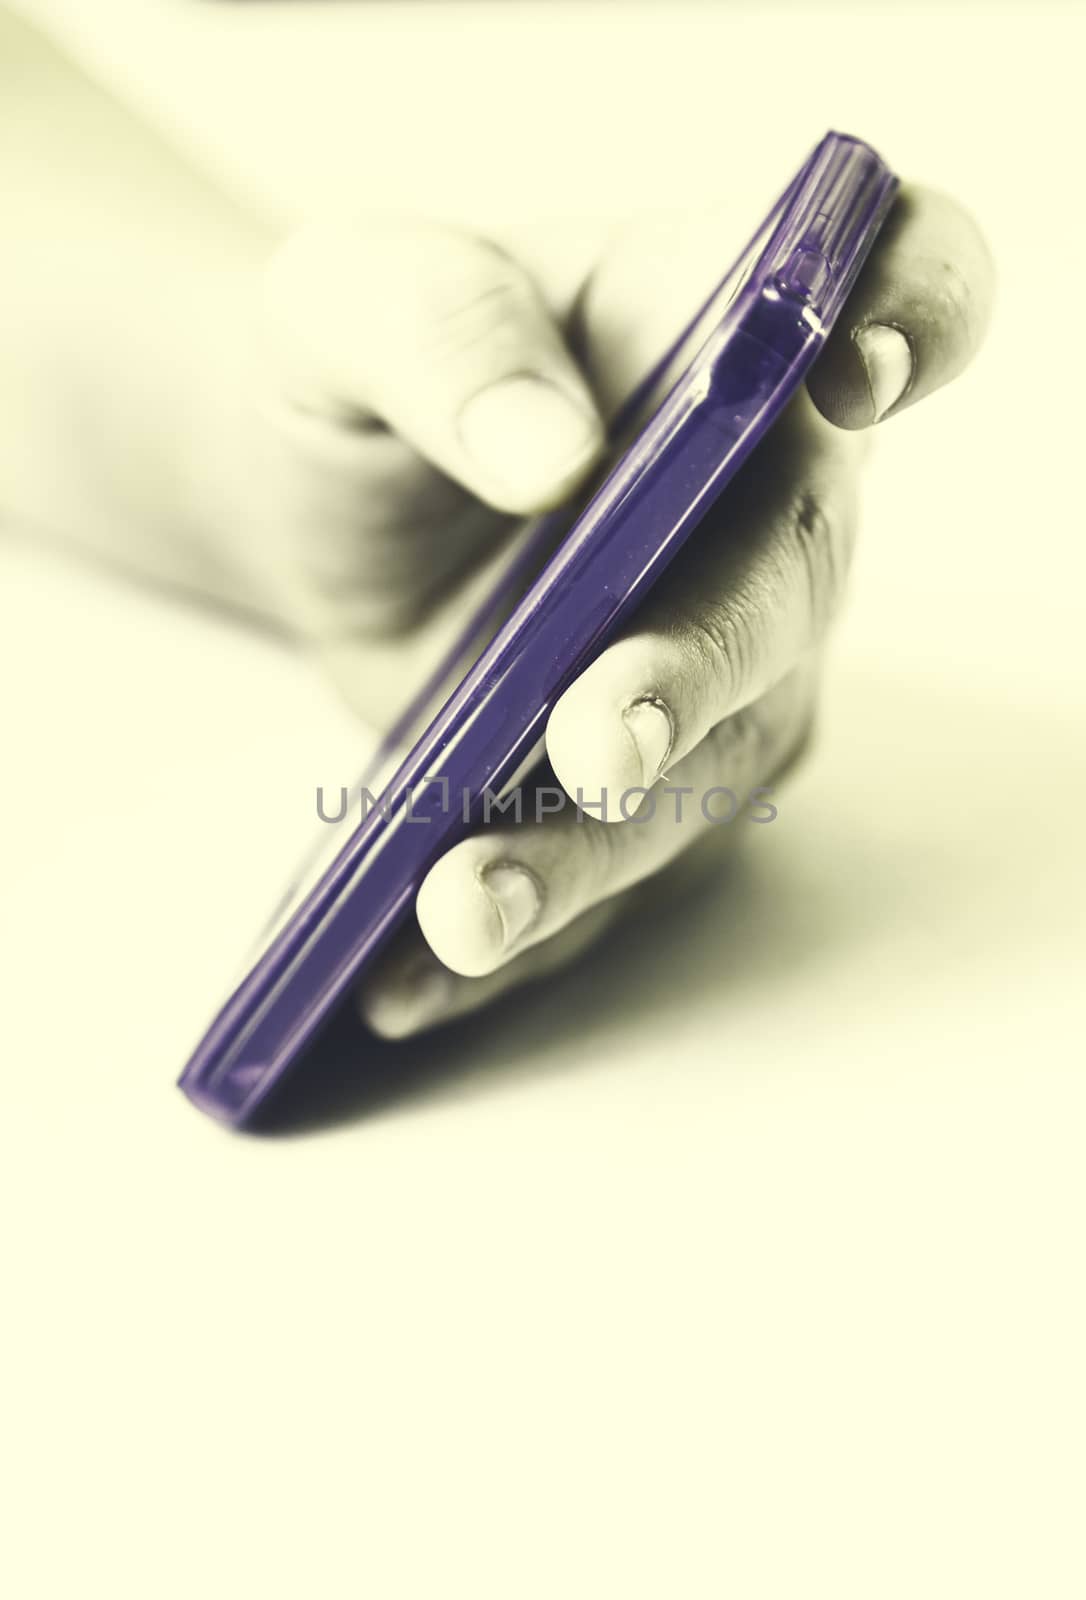 Using mobile phone, detail of a hand using a mobile phone the latest generation, technology